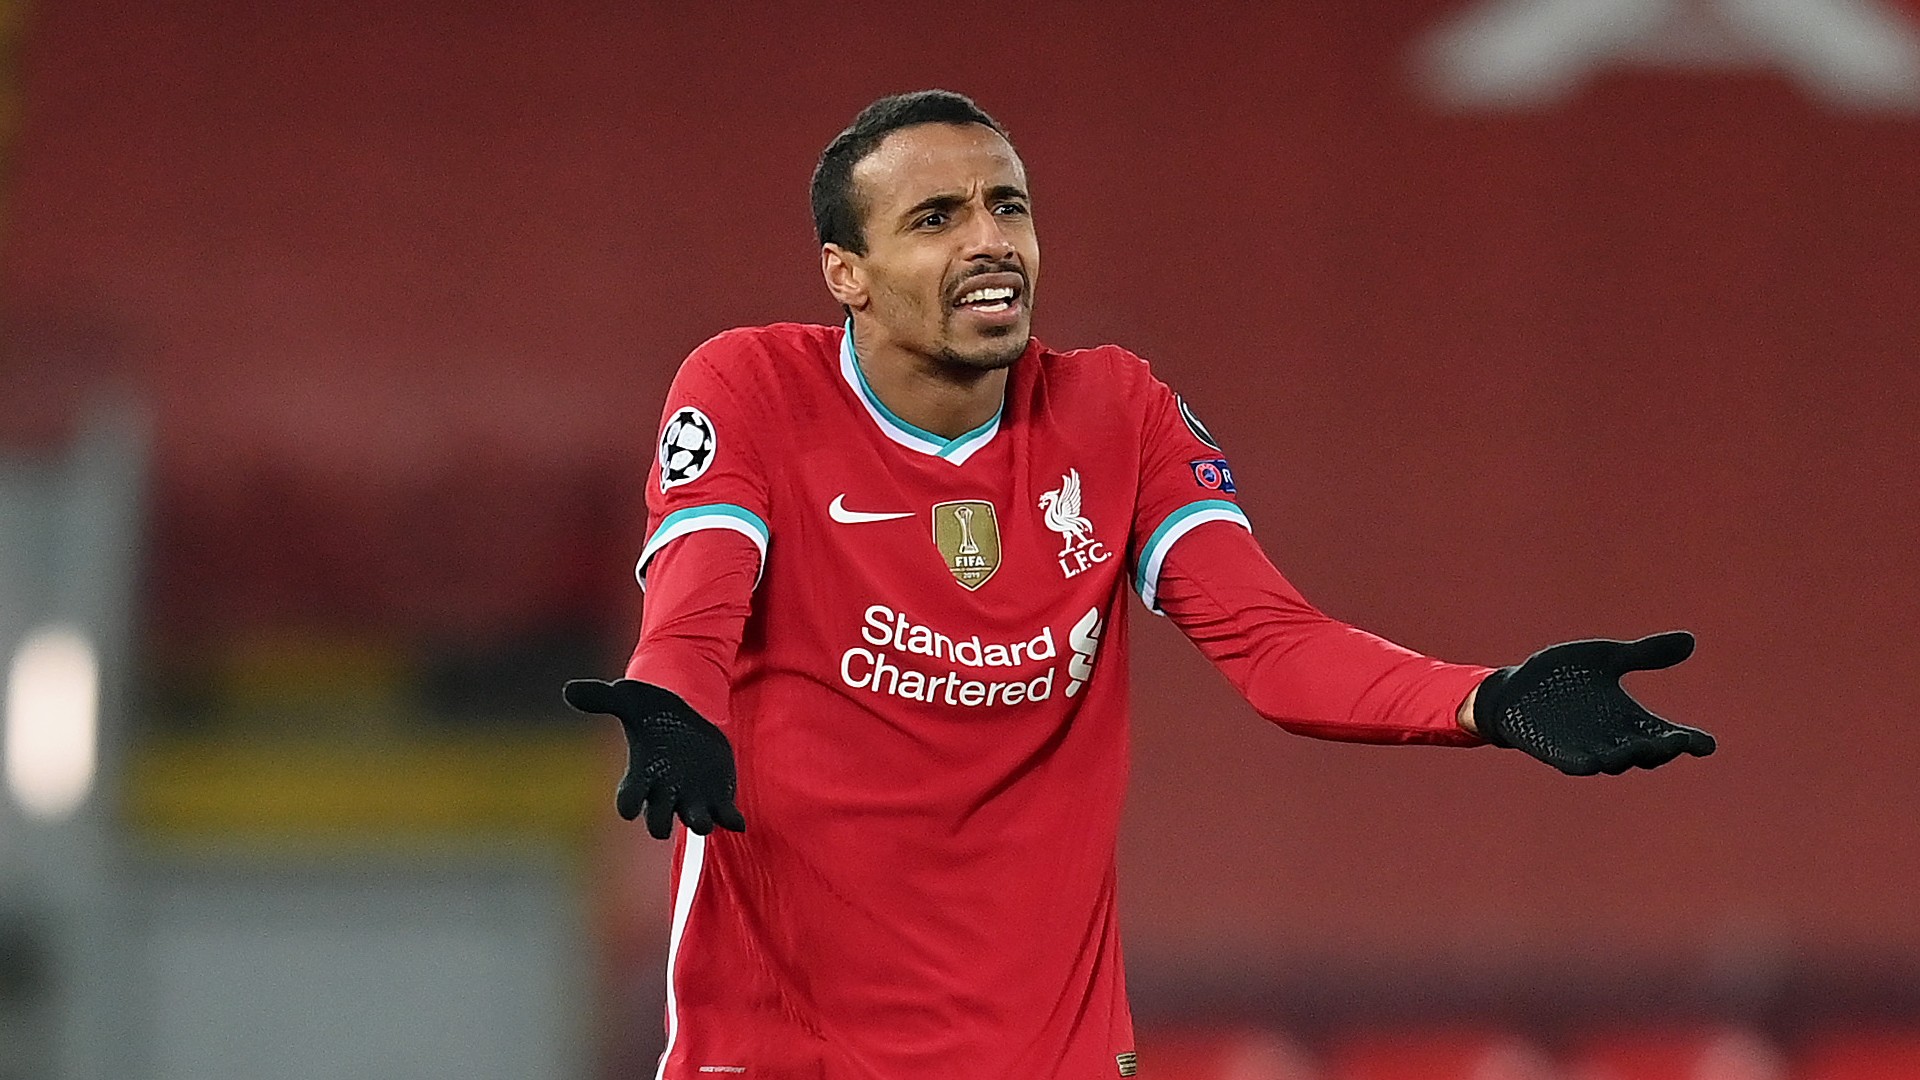 Klopp confirms Matip is doubtful for Liverpool's clash with Tottenham - but Keita could return